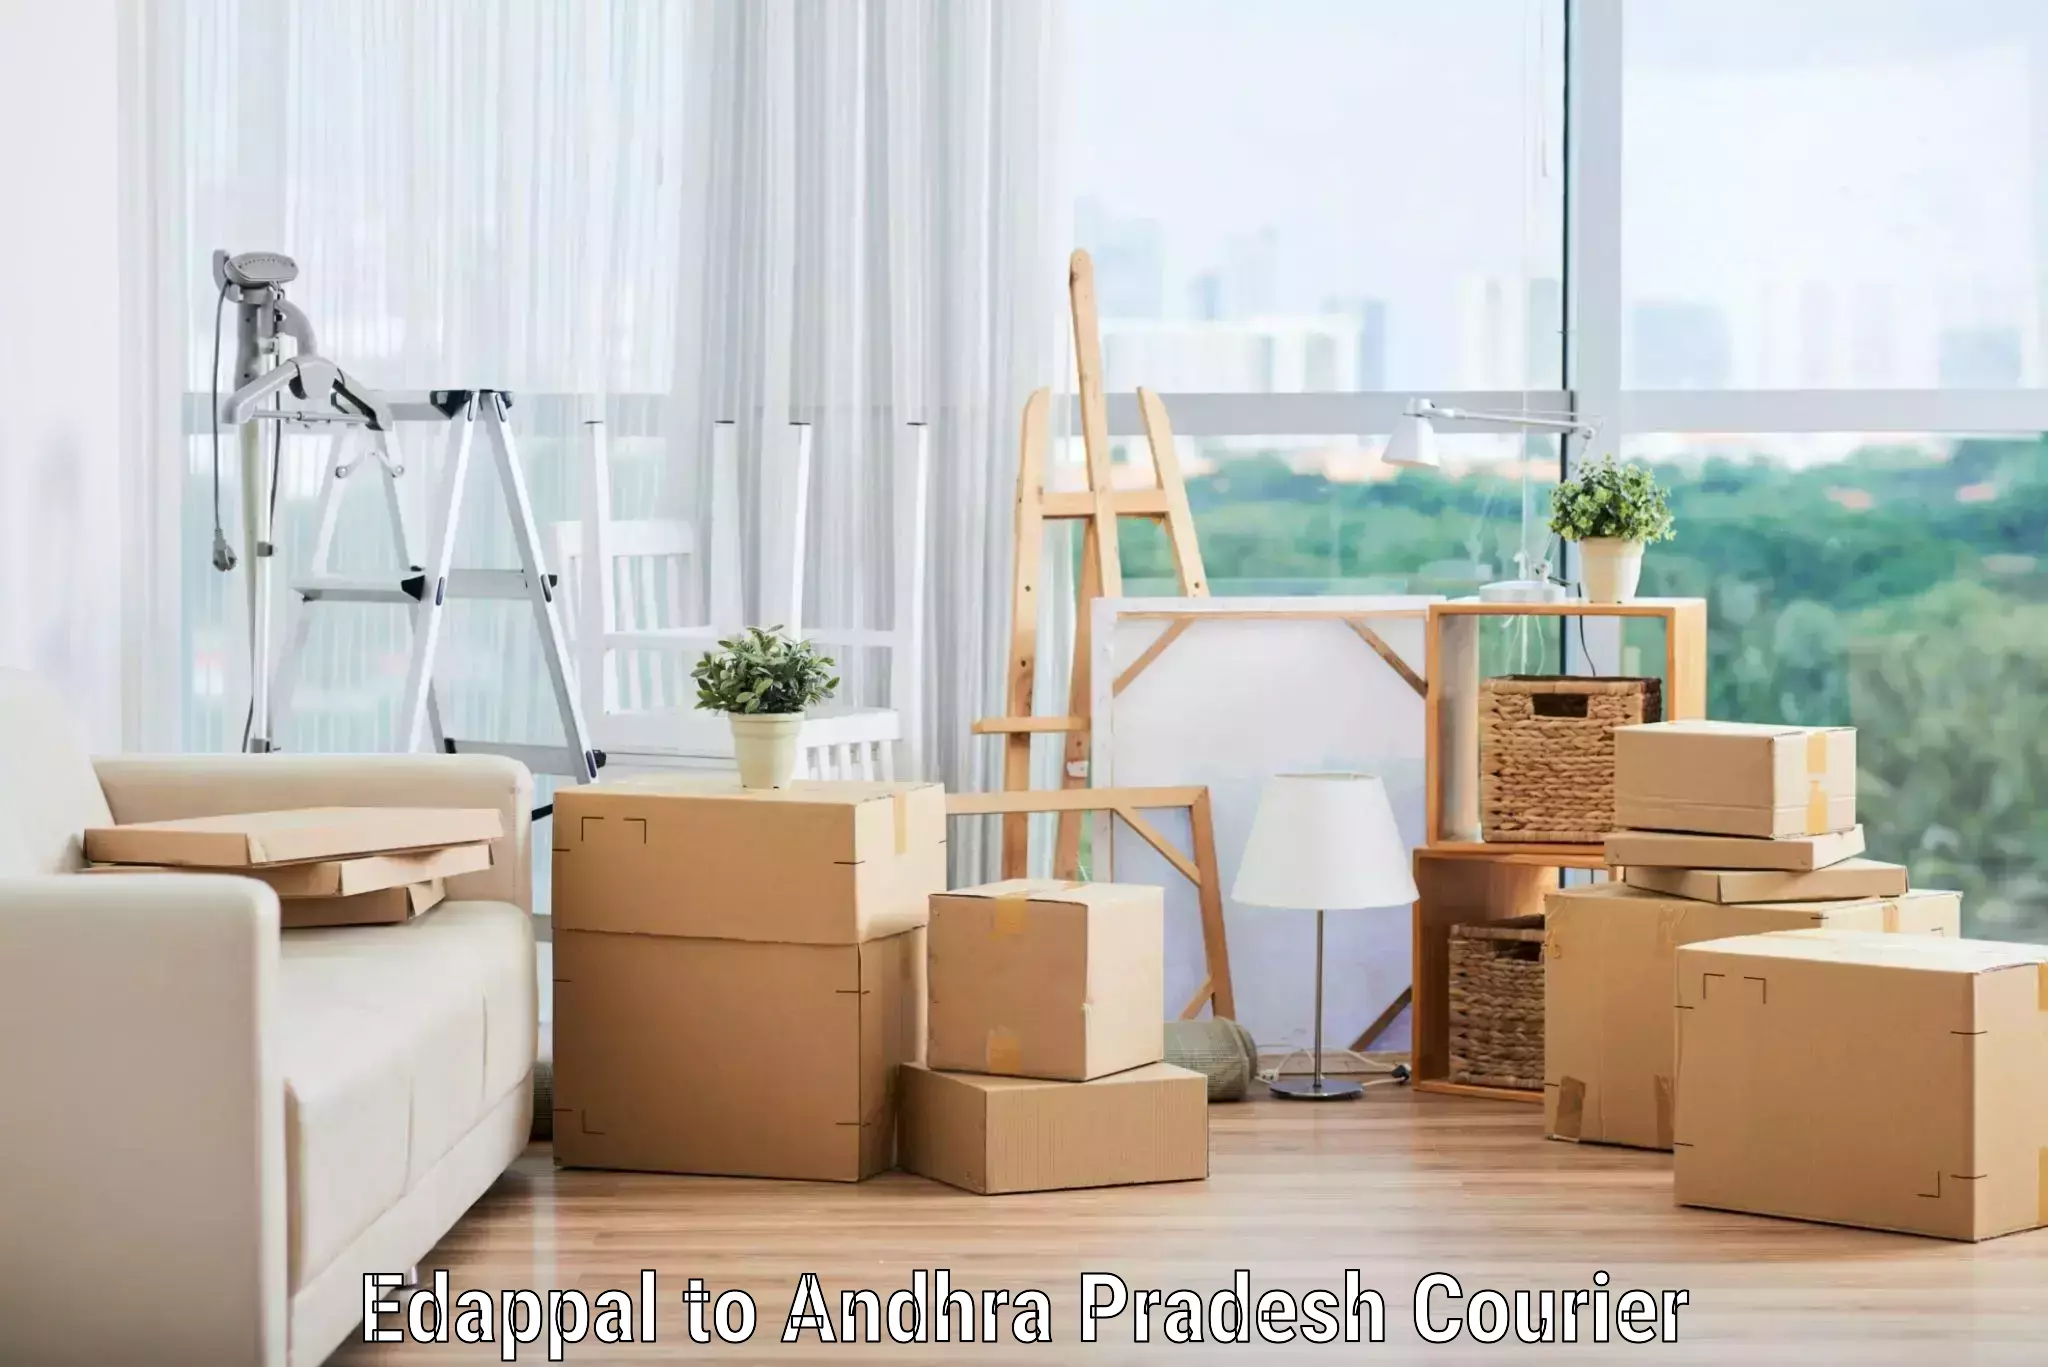 Furniture relocation experts Edappal to Tripuranthakam